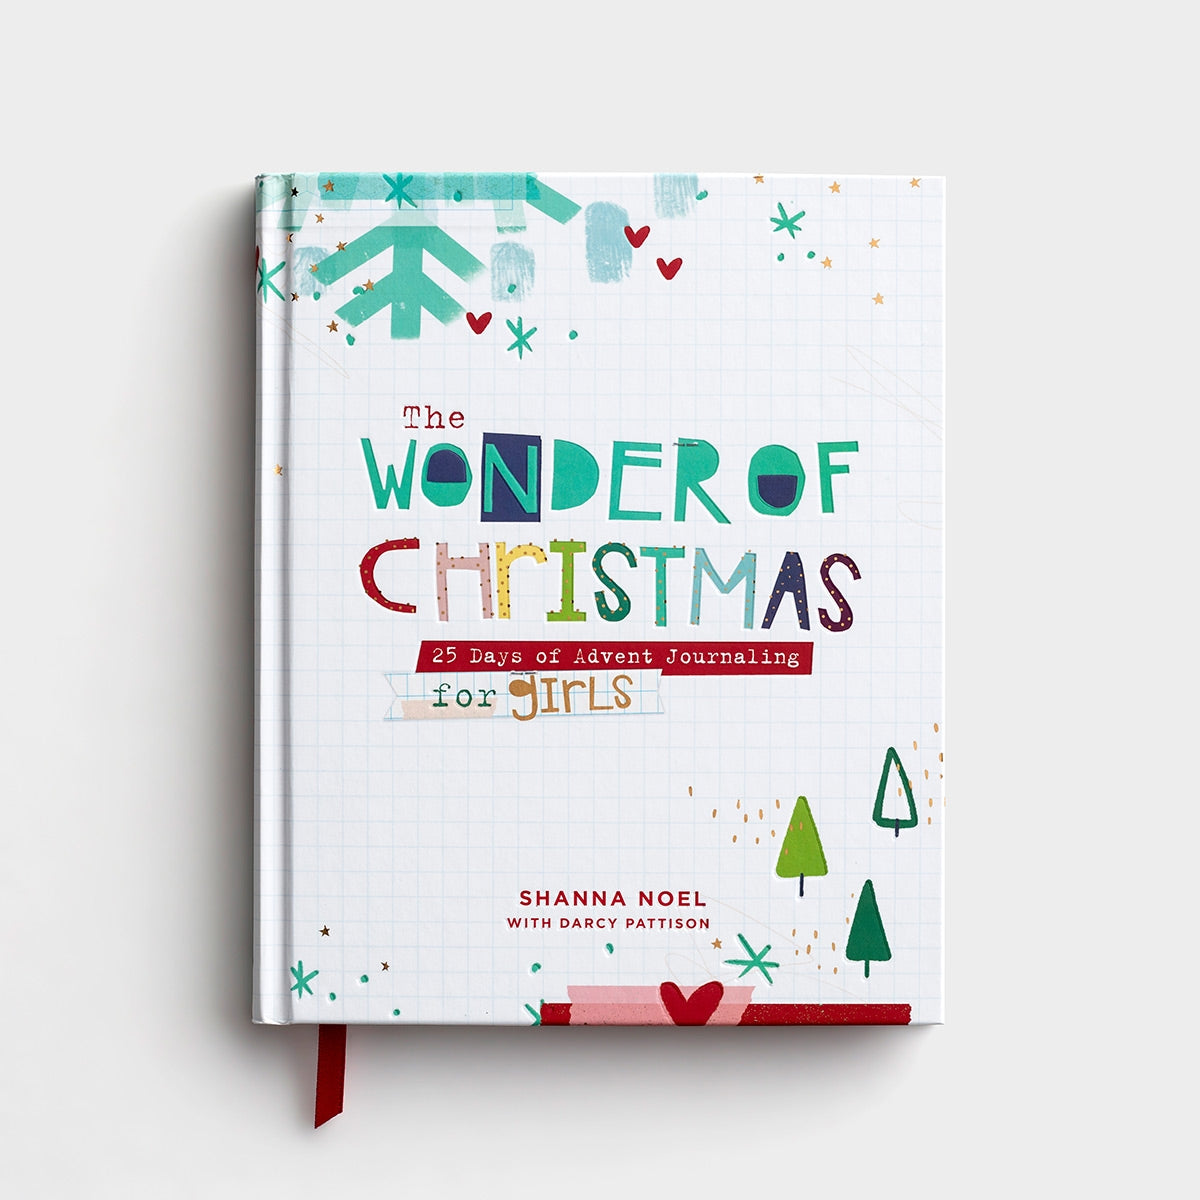 The Wonder of Christmas: 25 Days of Advent Journaling for Girls